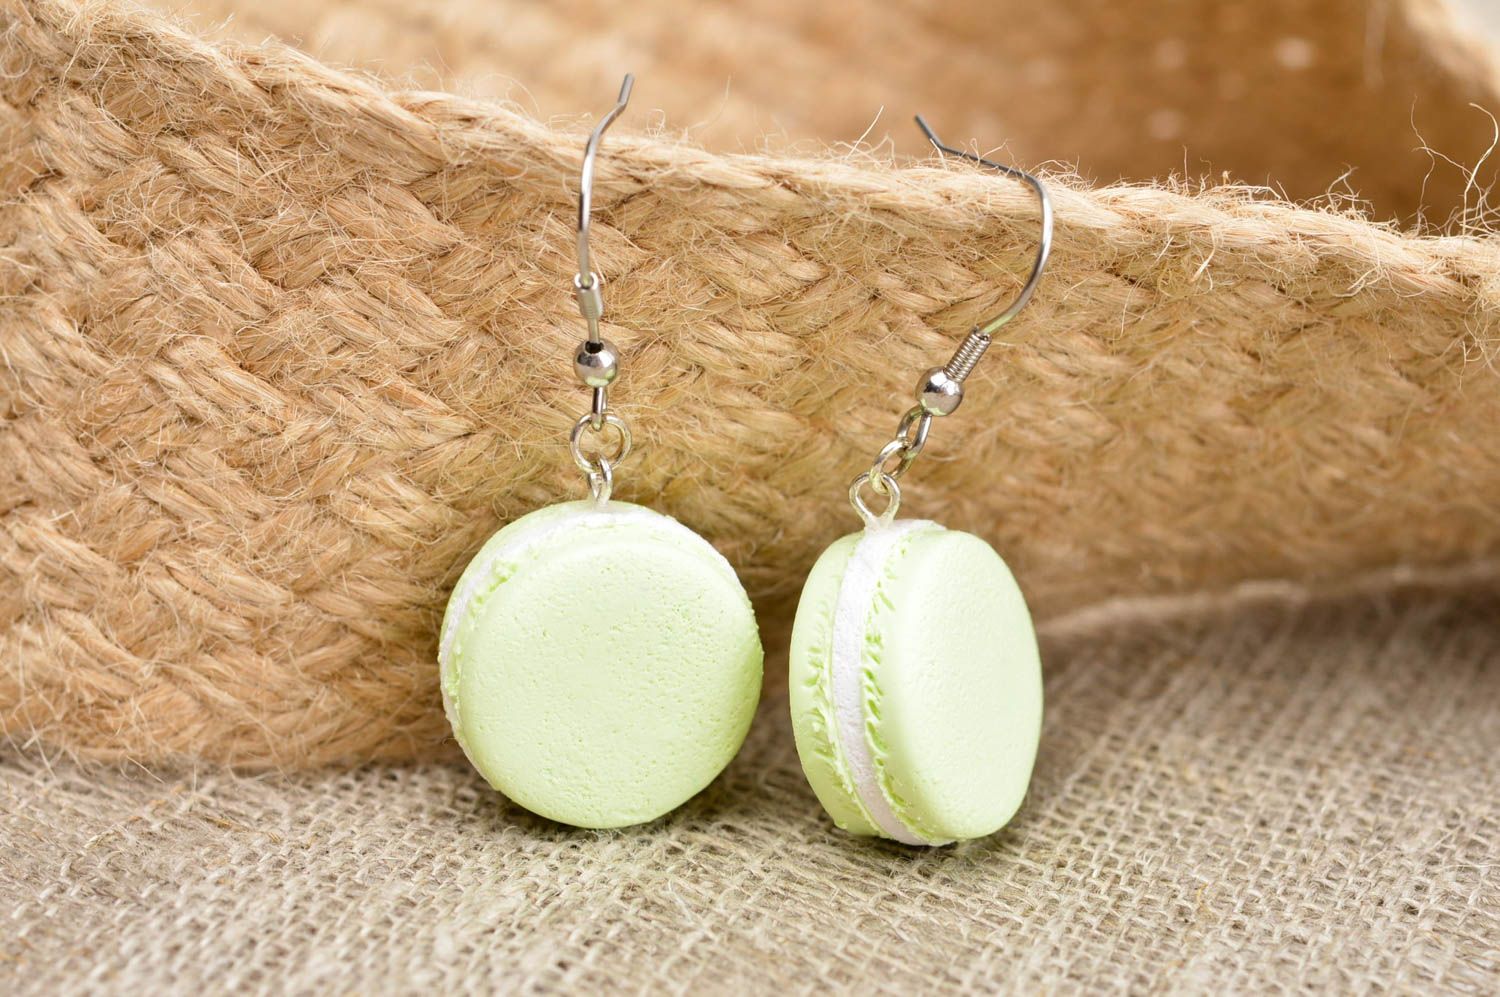 Handmade earrings designer accessory unusual jewelry clay earrings with charms photo 1